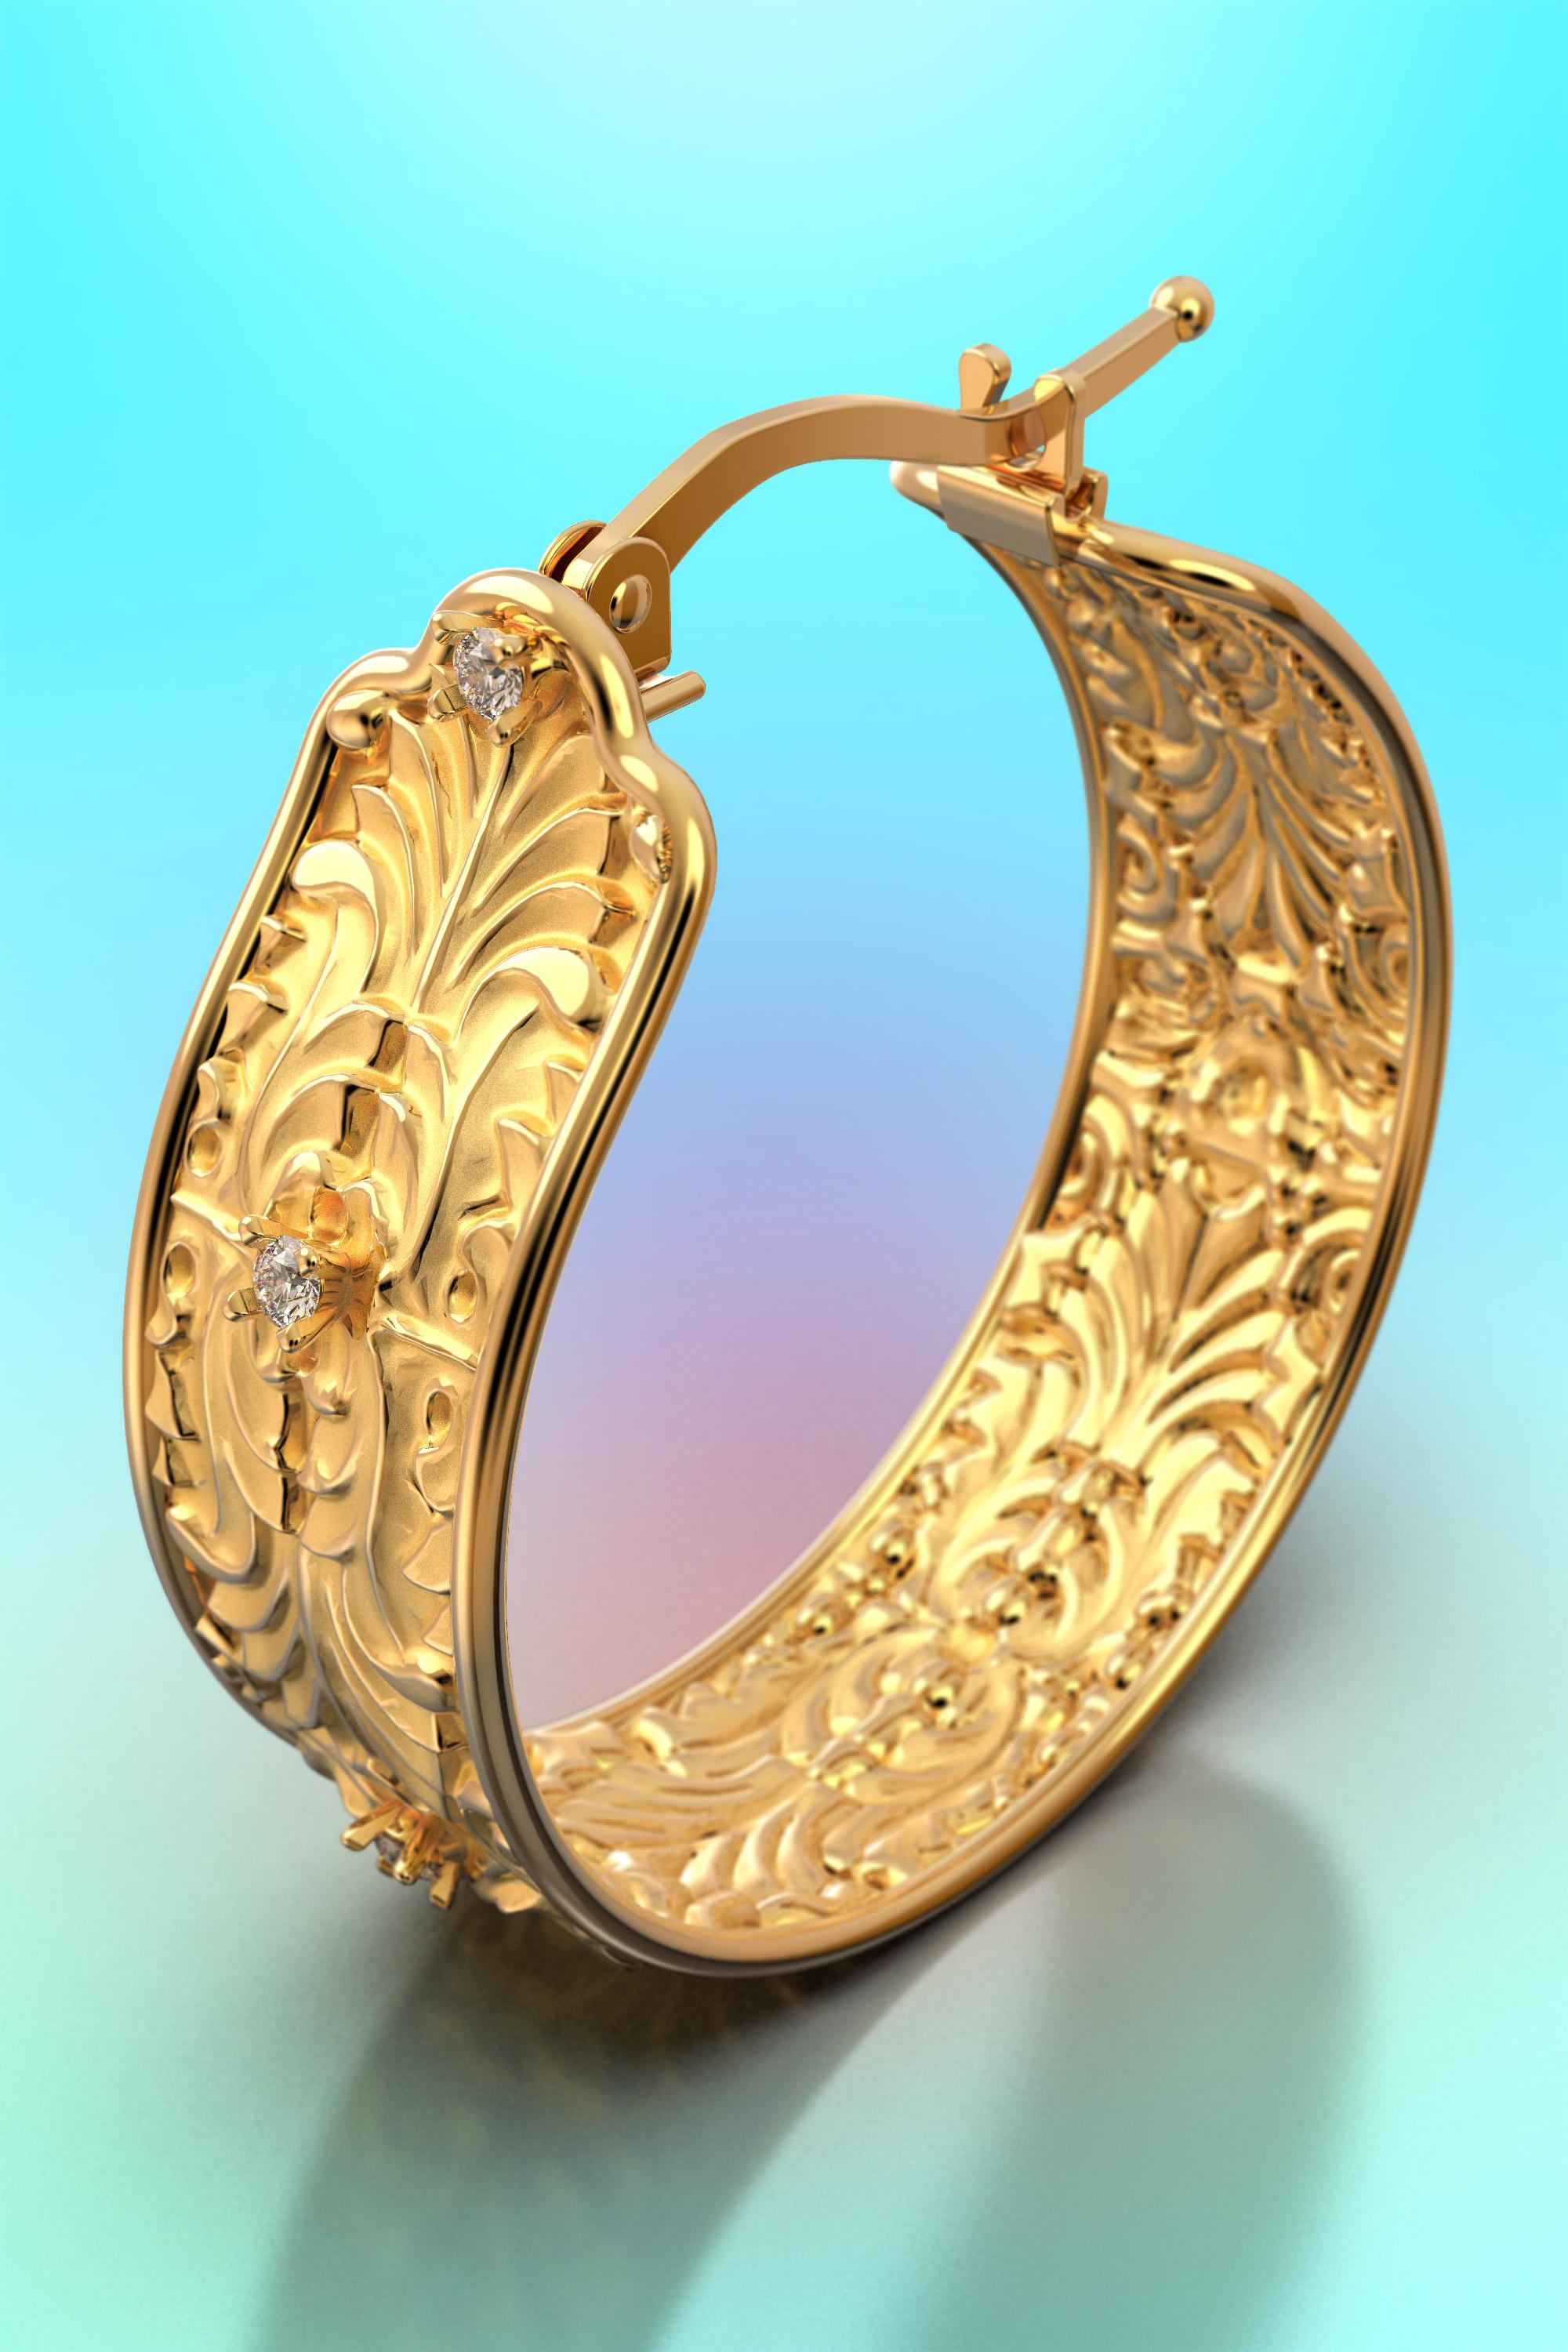 Oltremare Gioielli Baroque Hoop Earrings in 18k Gold with Natural Diamonds For Sale 3